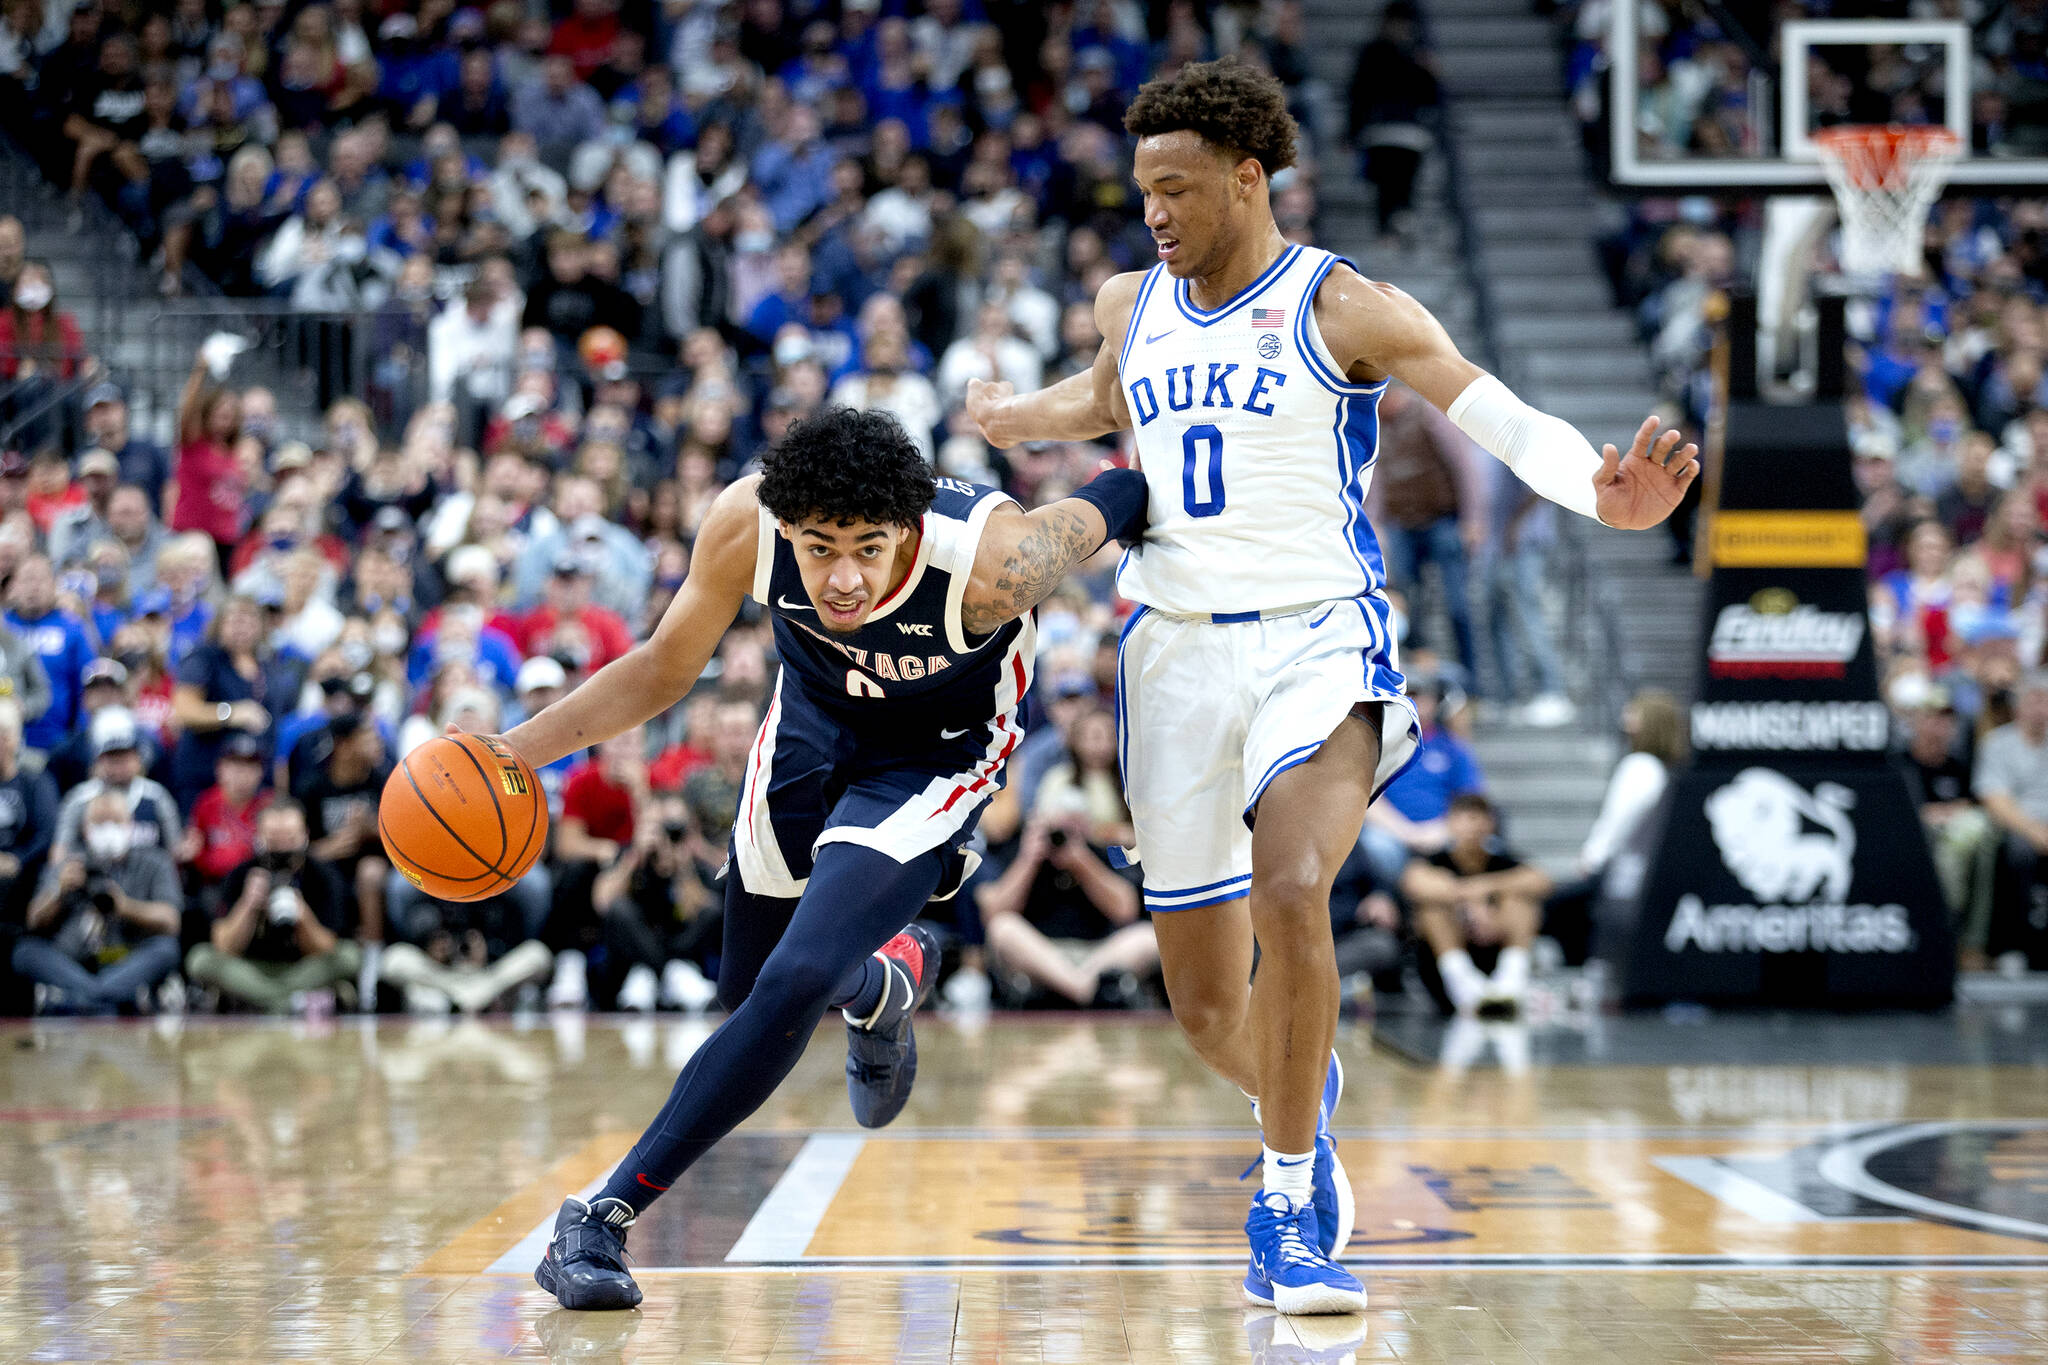 Gonzaga guard Julian Strawther, left, brings the ball up next to Duke forward Wendell Moore Jr. (0) during the first half of an NCAA college basketball game Friday in Las Vegas. (AP Photo/Ellen Schmidt)